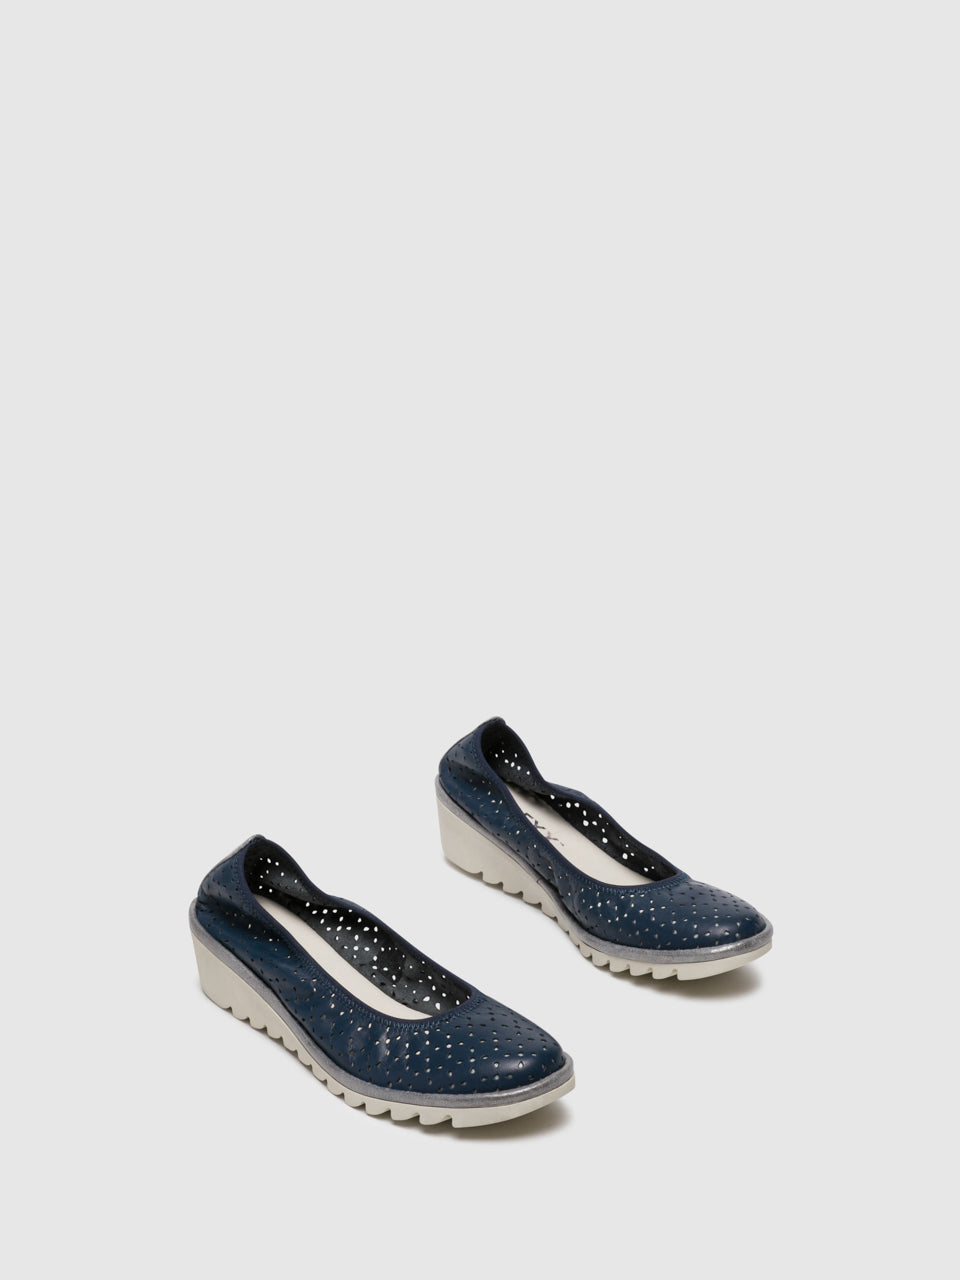 The Flexx Navy Wedge Shoes